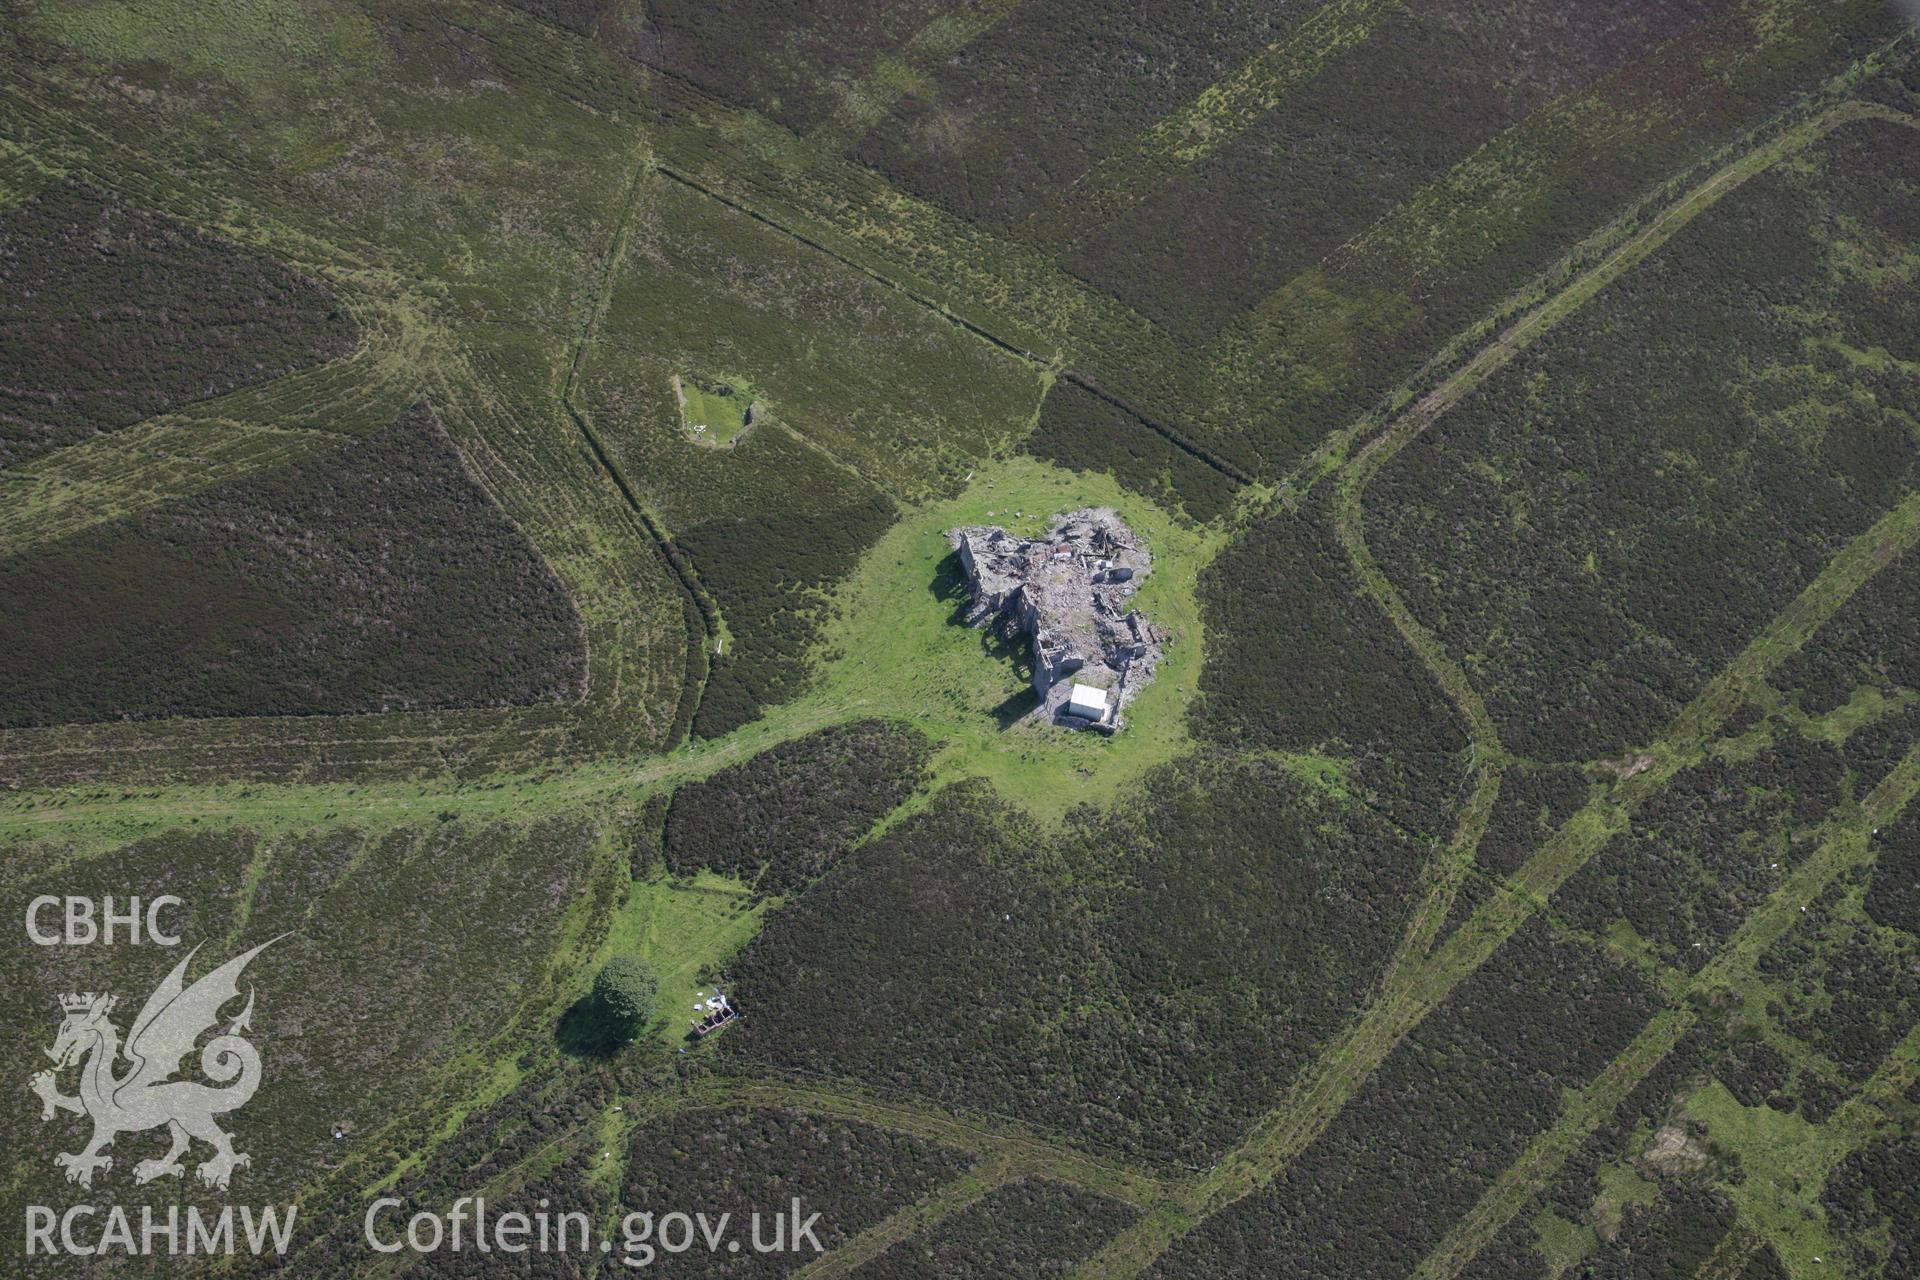 RCAHMW colour oblique aerial photograph of Gwylfa Hiraethog Shooting Lodge. Taken on 31 July 2007 by Toby Driver